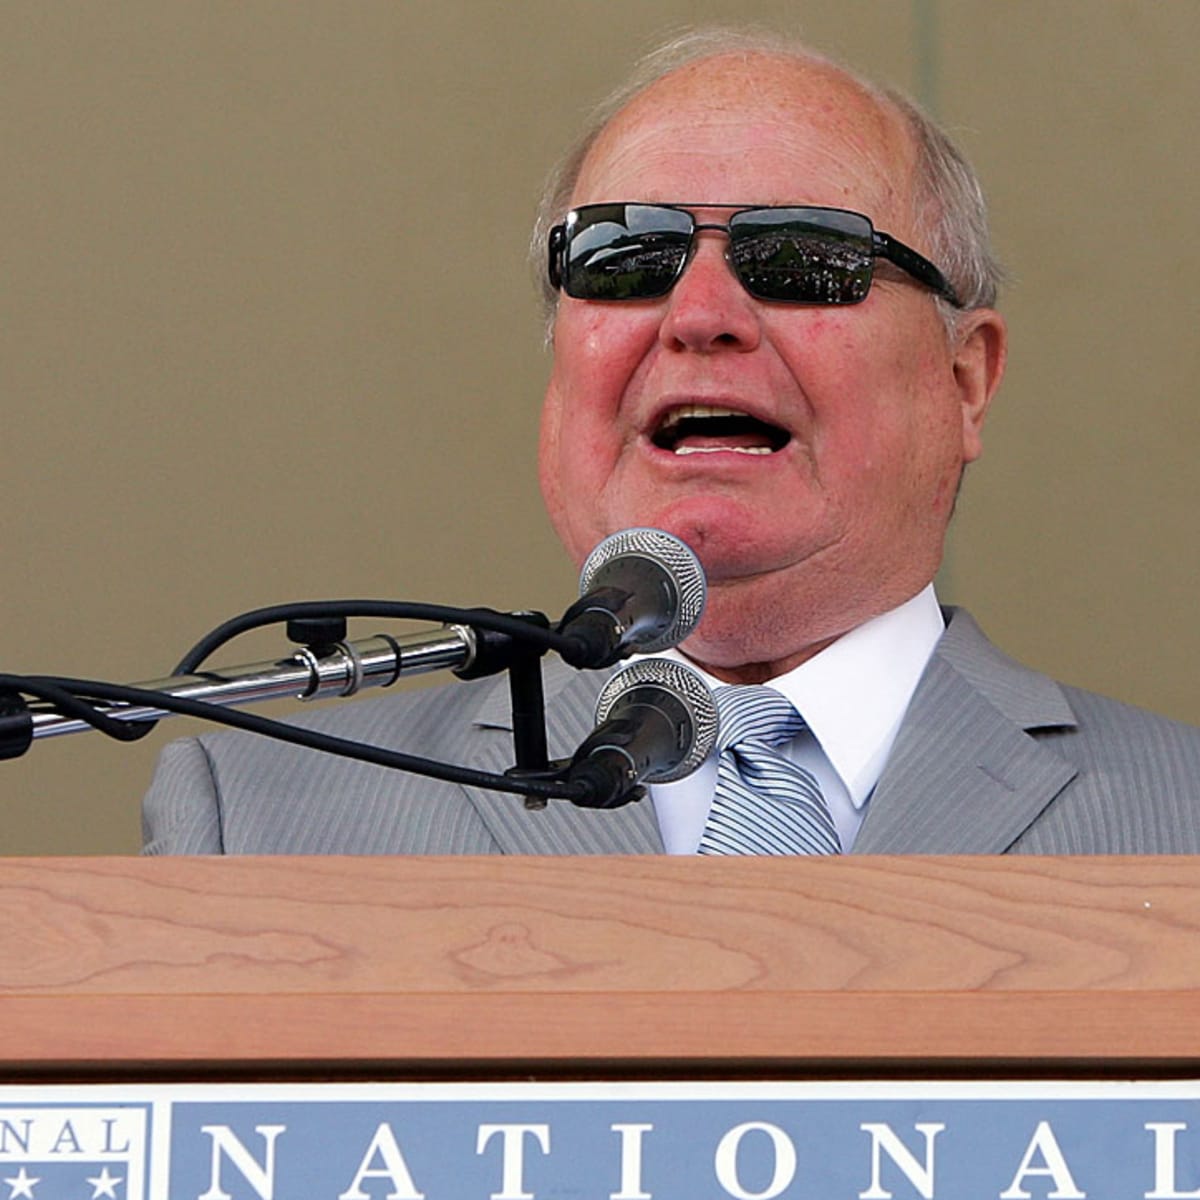 Seattle Mariners: Remembering broadcaster Dave Niehaus - Sports